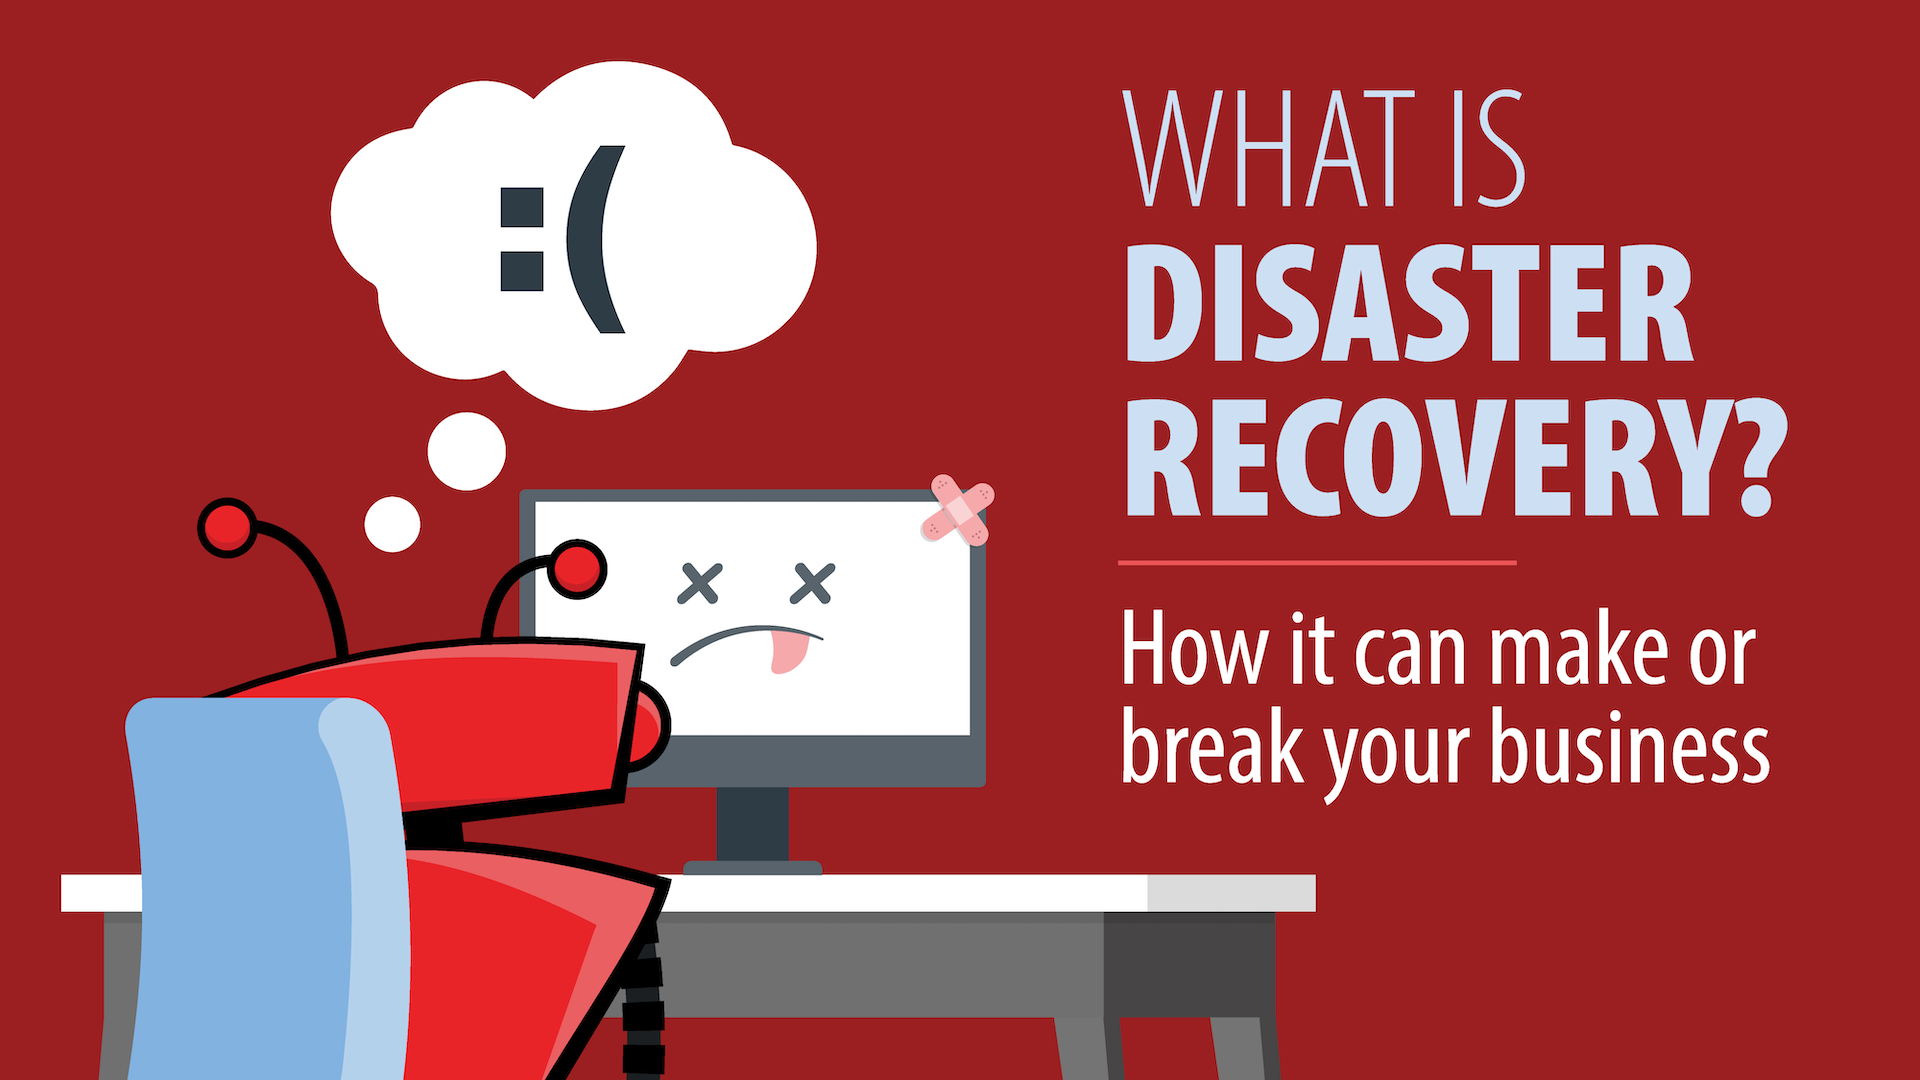 How Disaster Recovery Can Make or Break Your Business